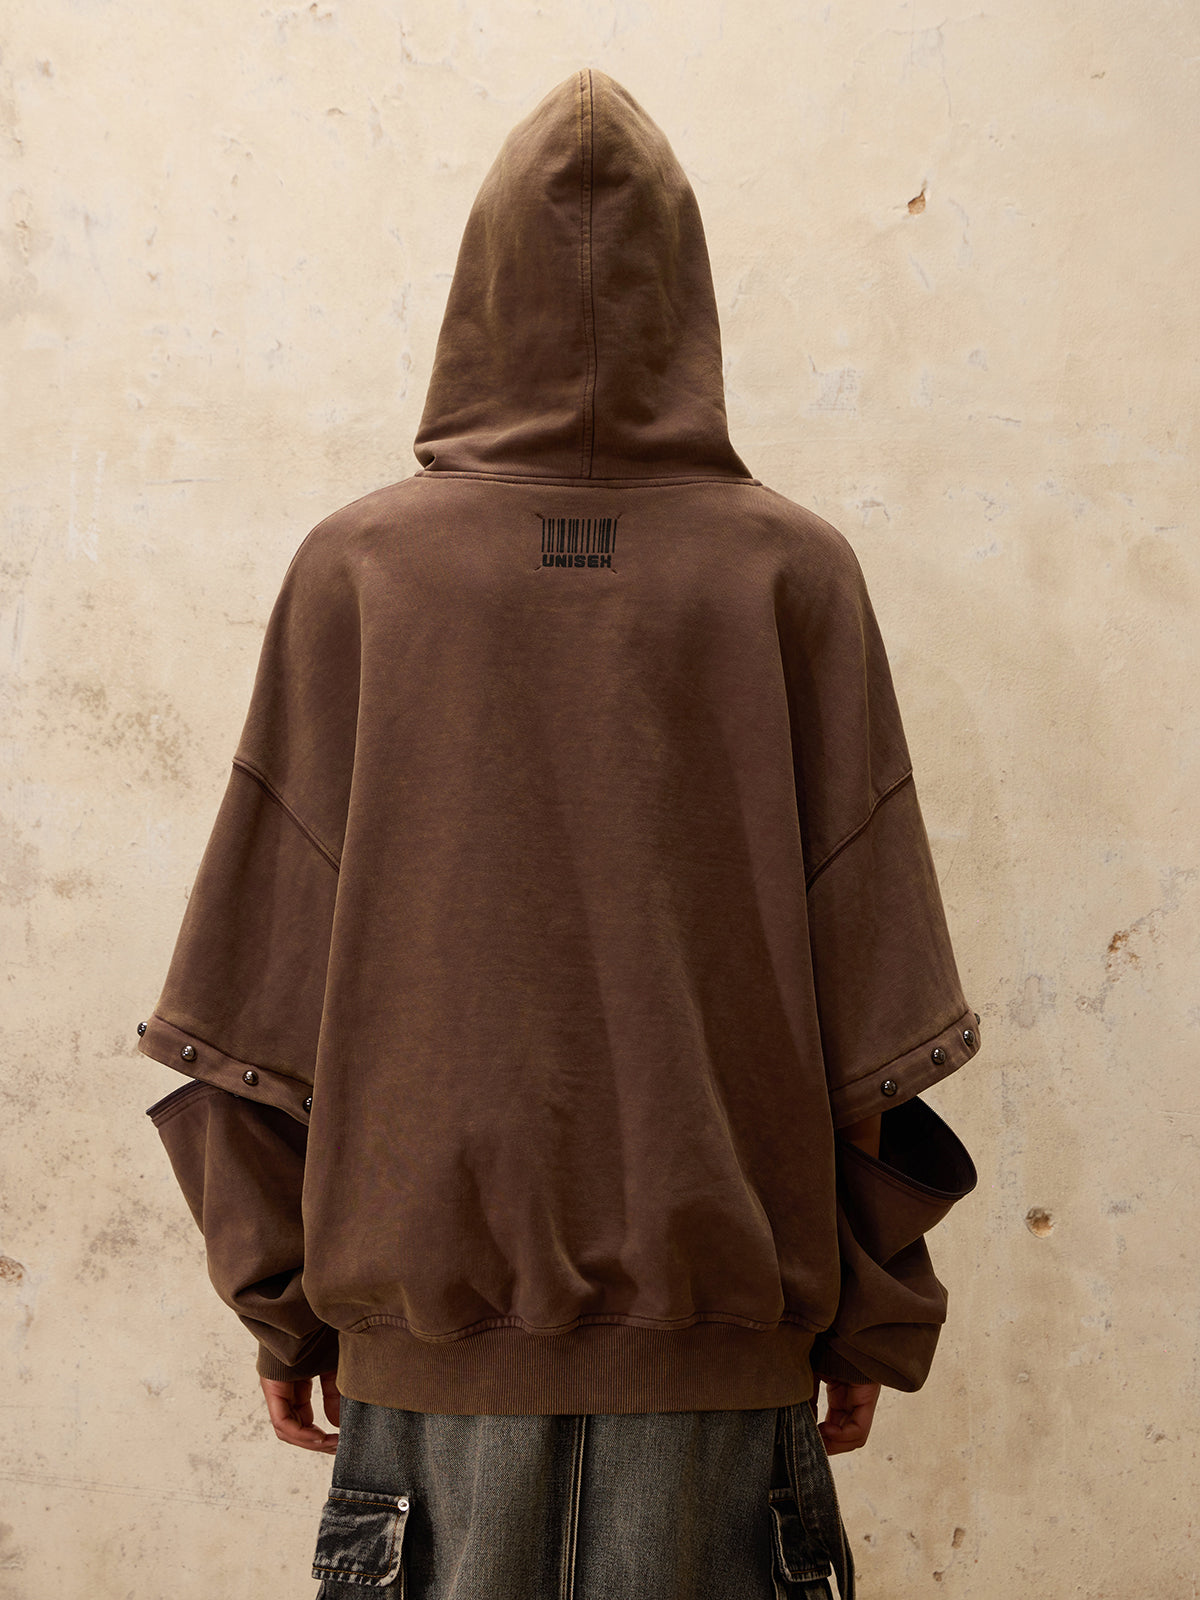 Personsoul Removable Sleeves Hoodie